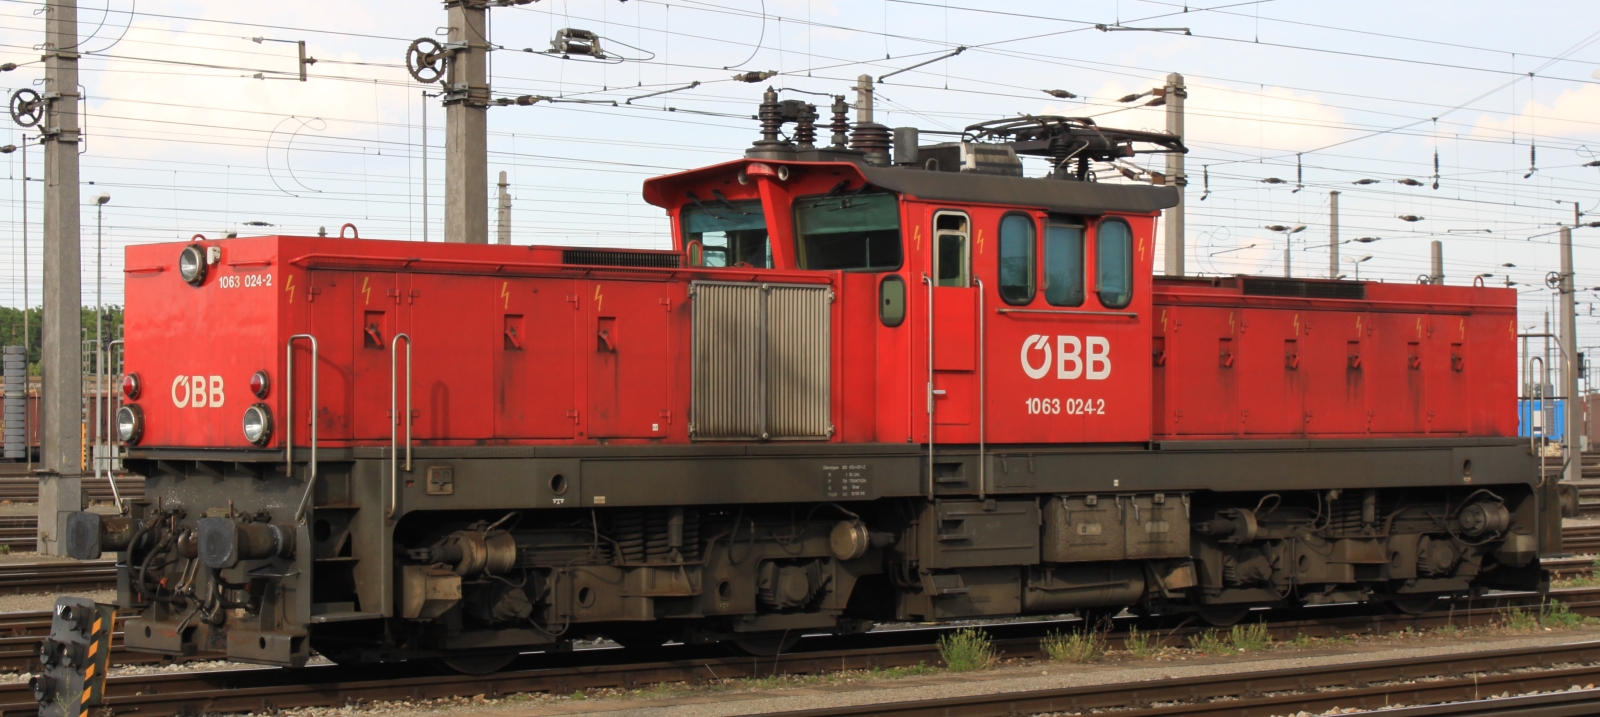 1063.024 in June 2011 at the Vienna-Kledering freight yard